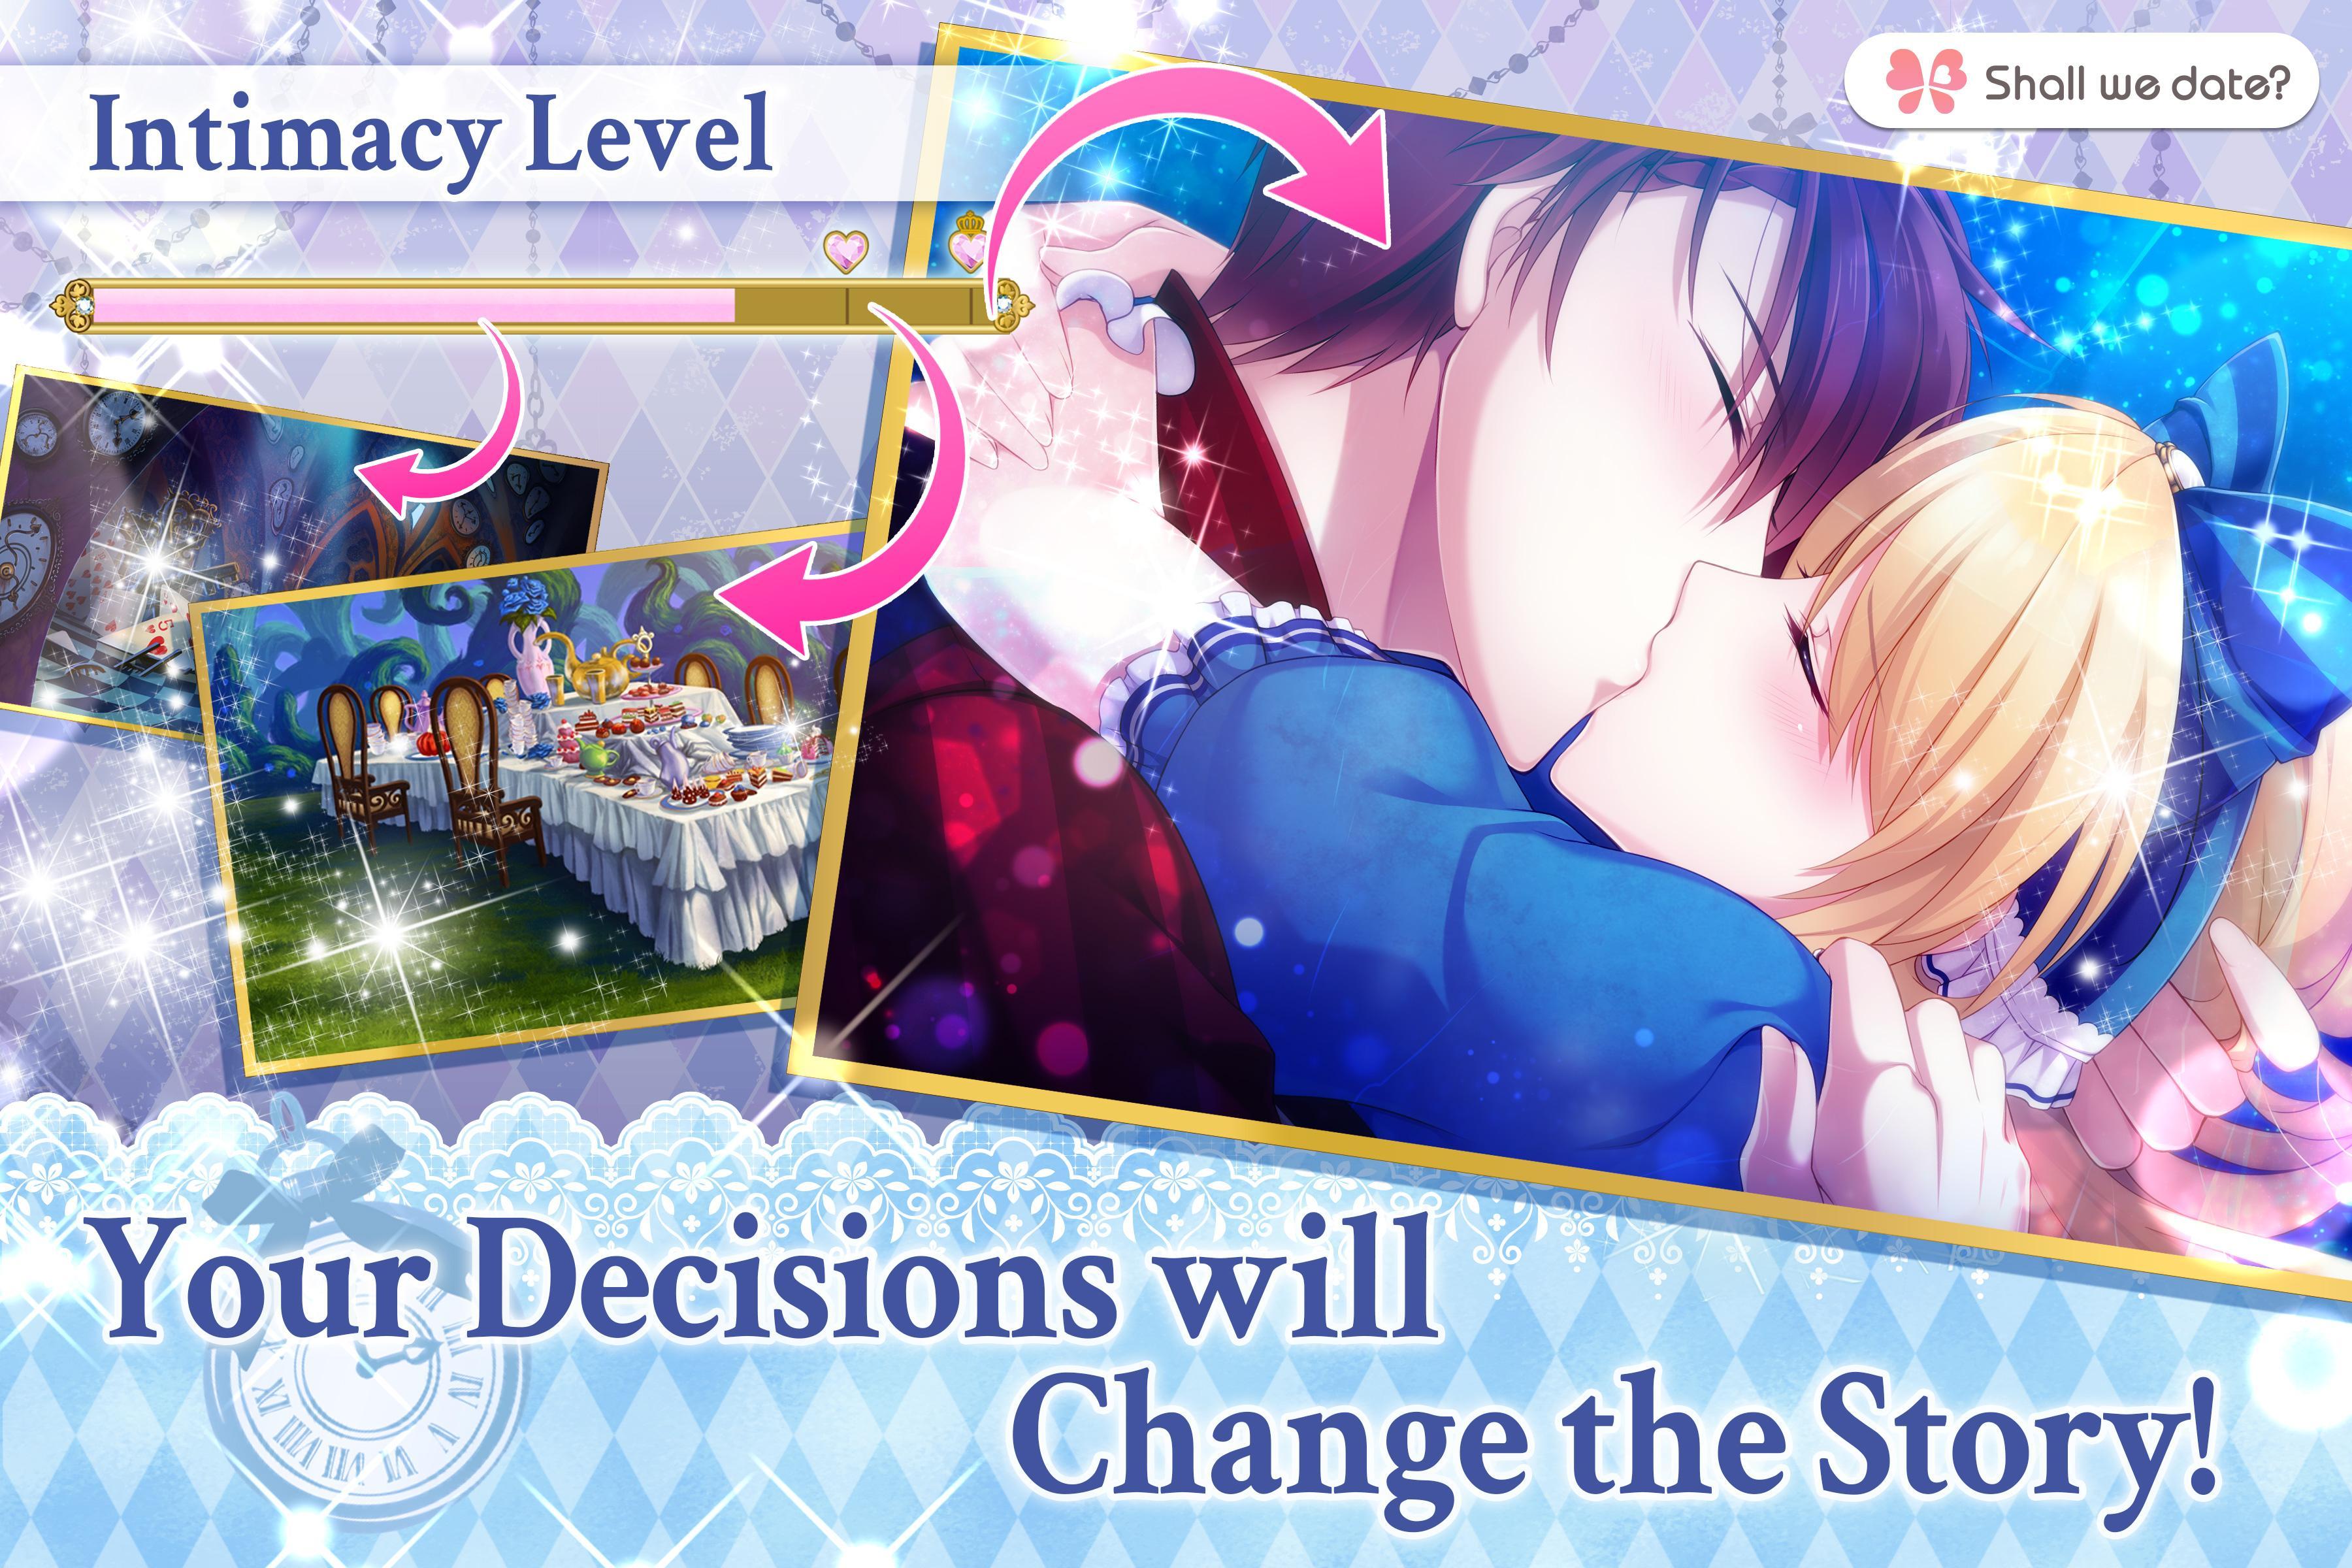 Lost Alice - otome game/dating sim #shall we date 1.5.1 Screenshot 20